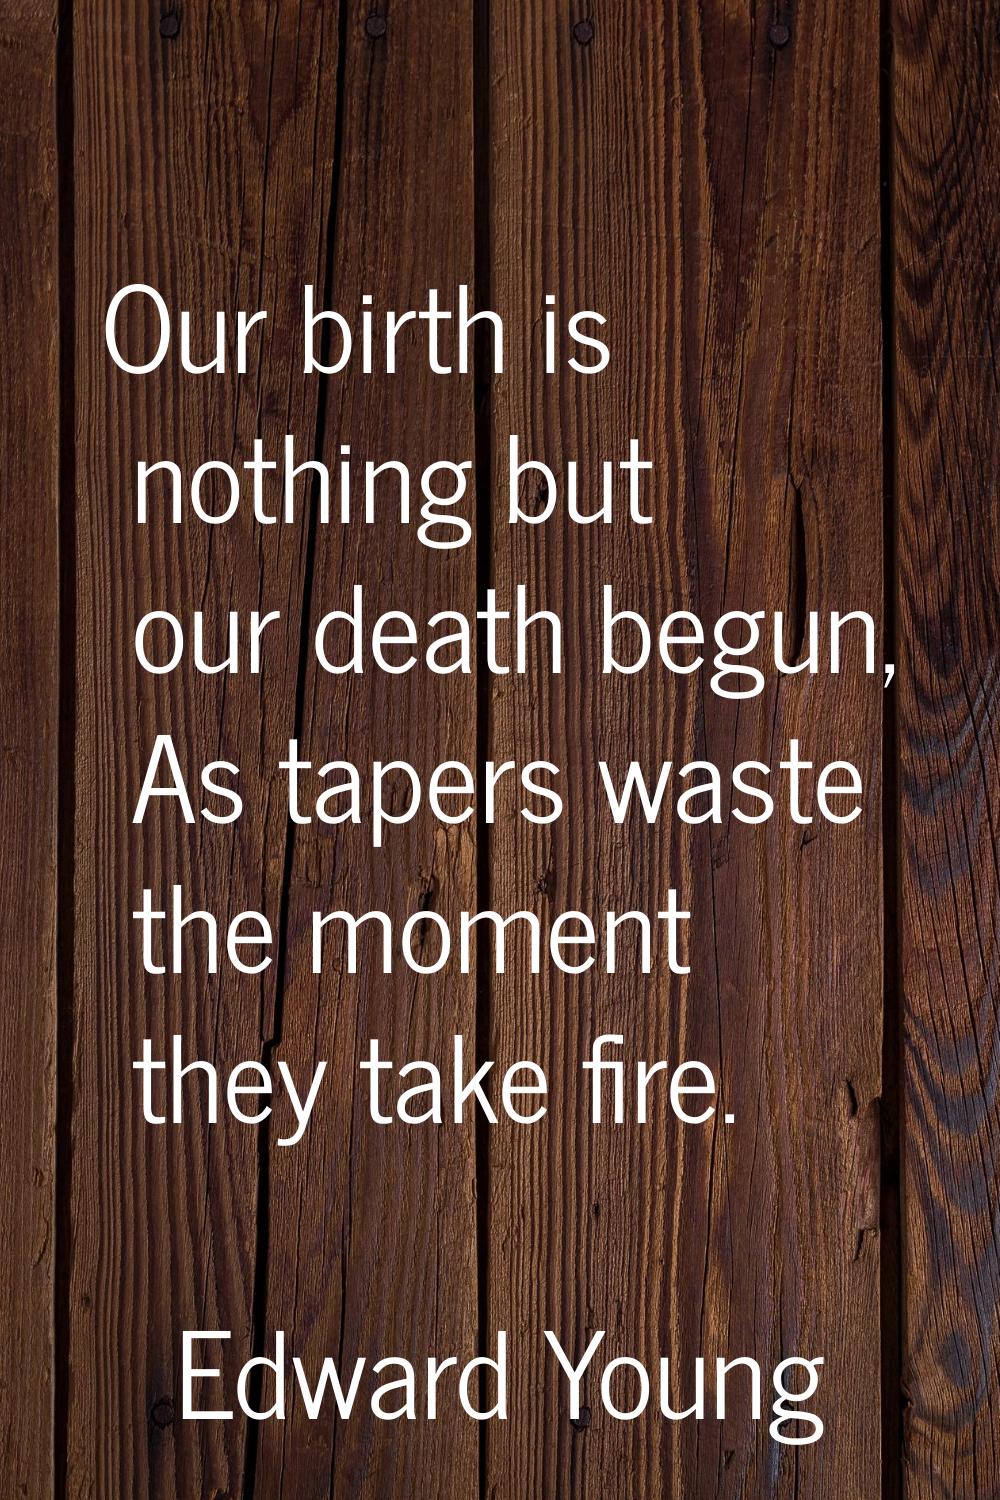 Our birth is nothing but our death begun, As tapers waste the moment they take fire.